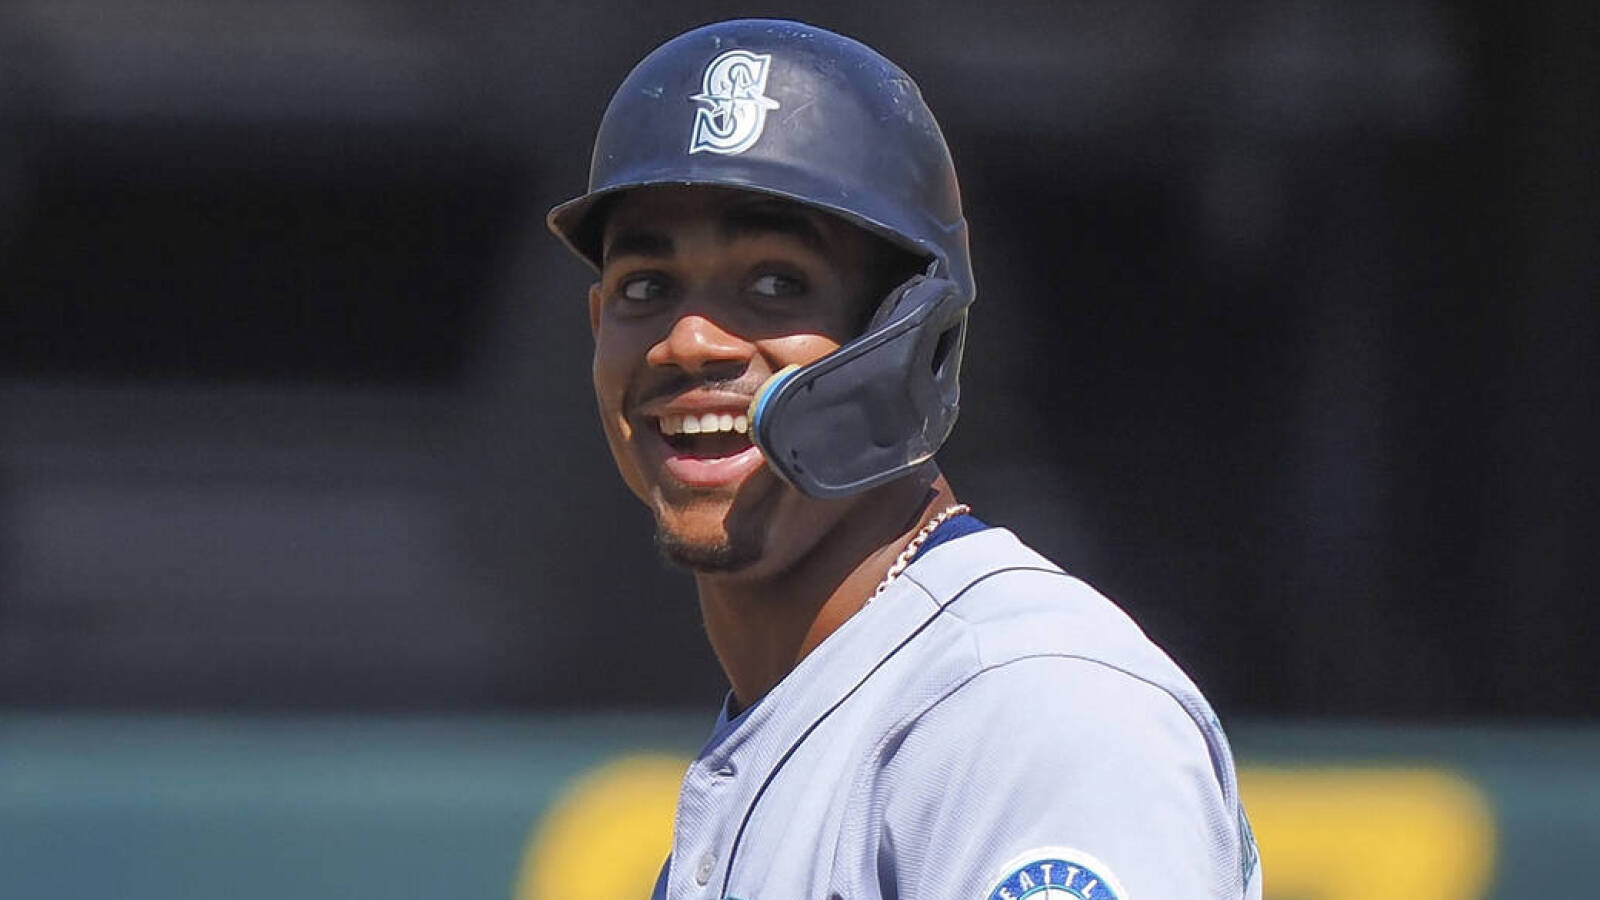 Mariners rookie Julio Rodriguez to undergo MRI for ‘concerning’ back issue